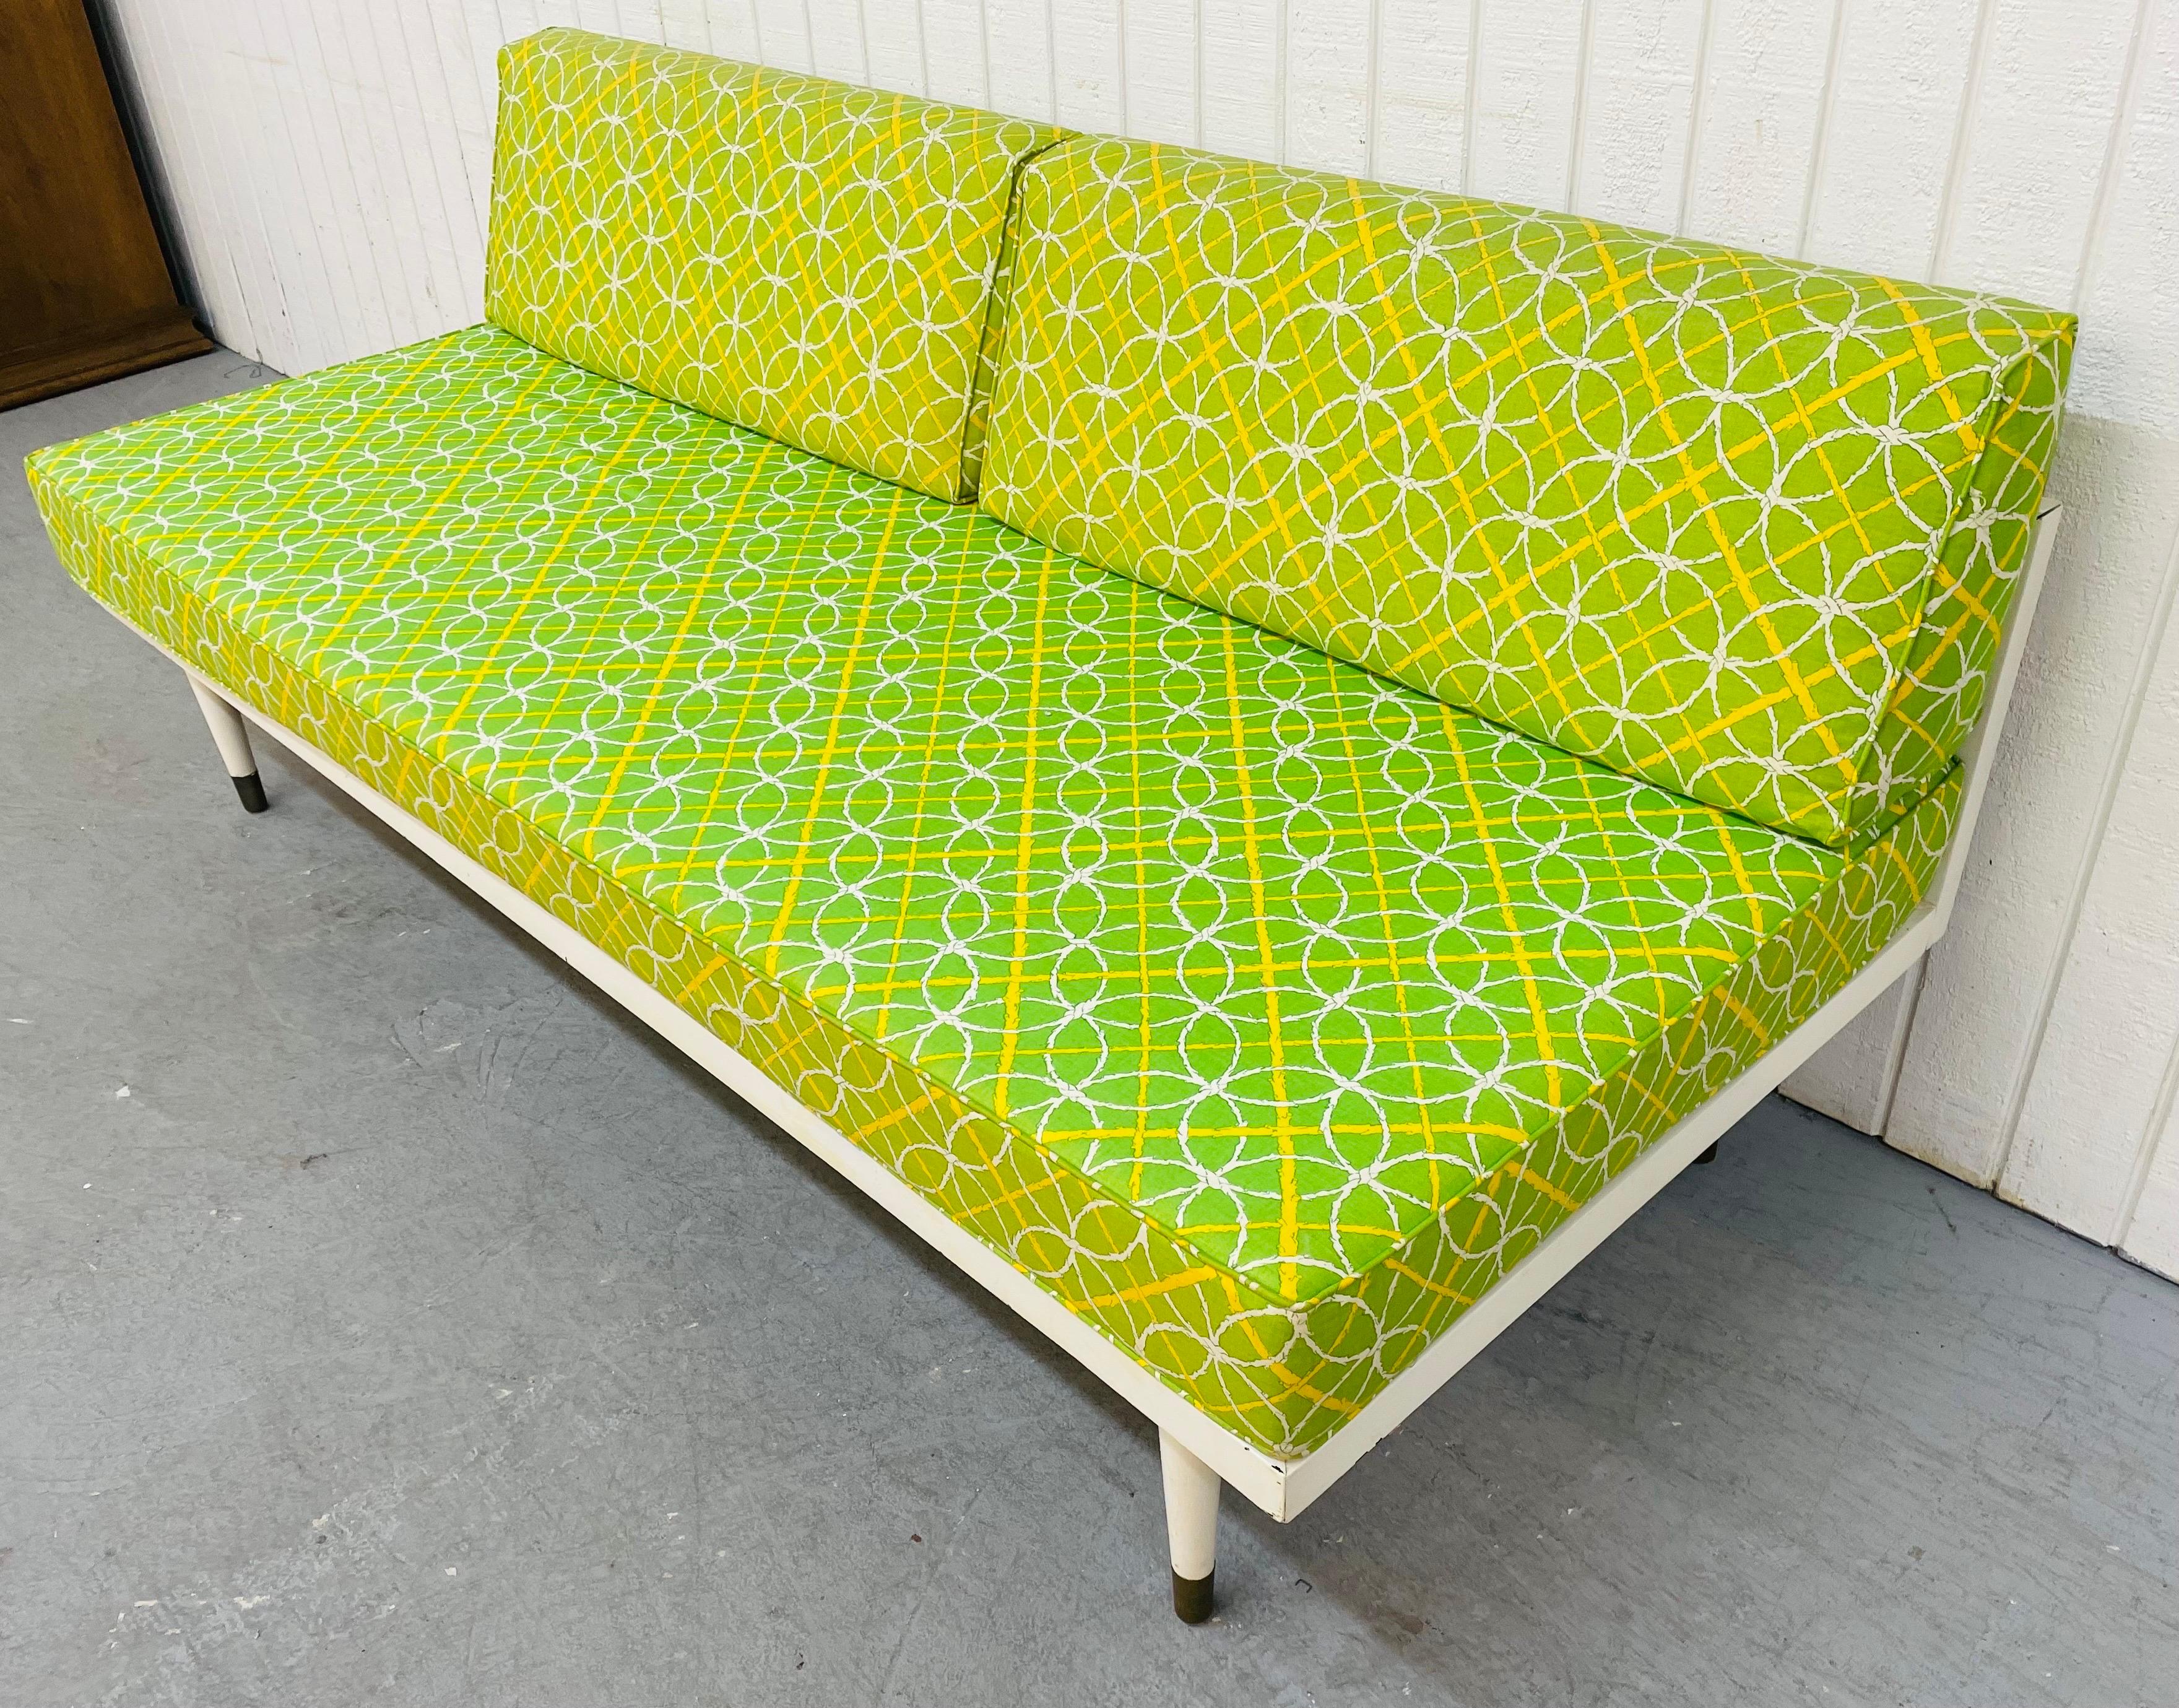 This listing is for a Mid-century lime green day bed. Featuring original removable upholstered cushions, wood frame that has vintage off-white paint, and screw-on legs with brass caps.